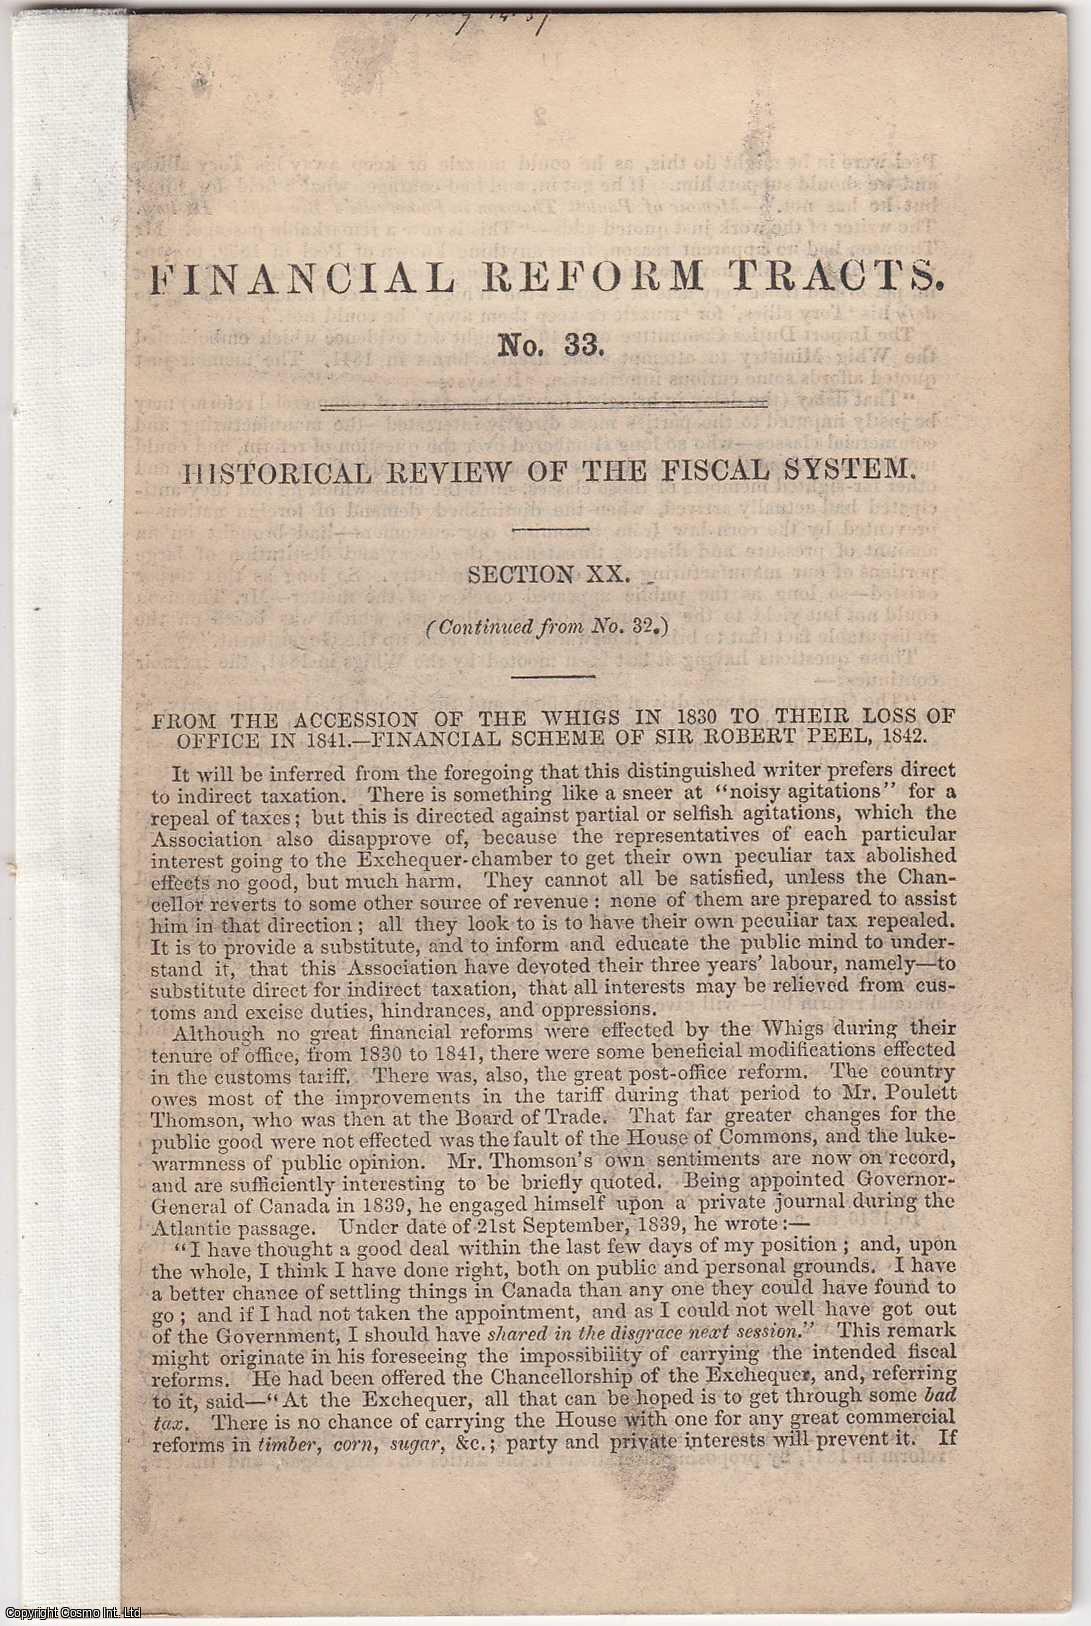 --- - [1851] Historical Review of the Fiscal System. Financial Reform Tracts No 33, 34, 35.